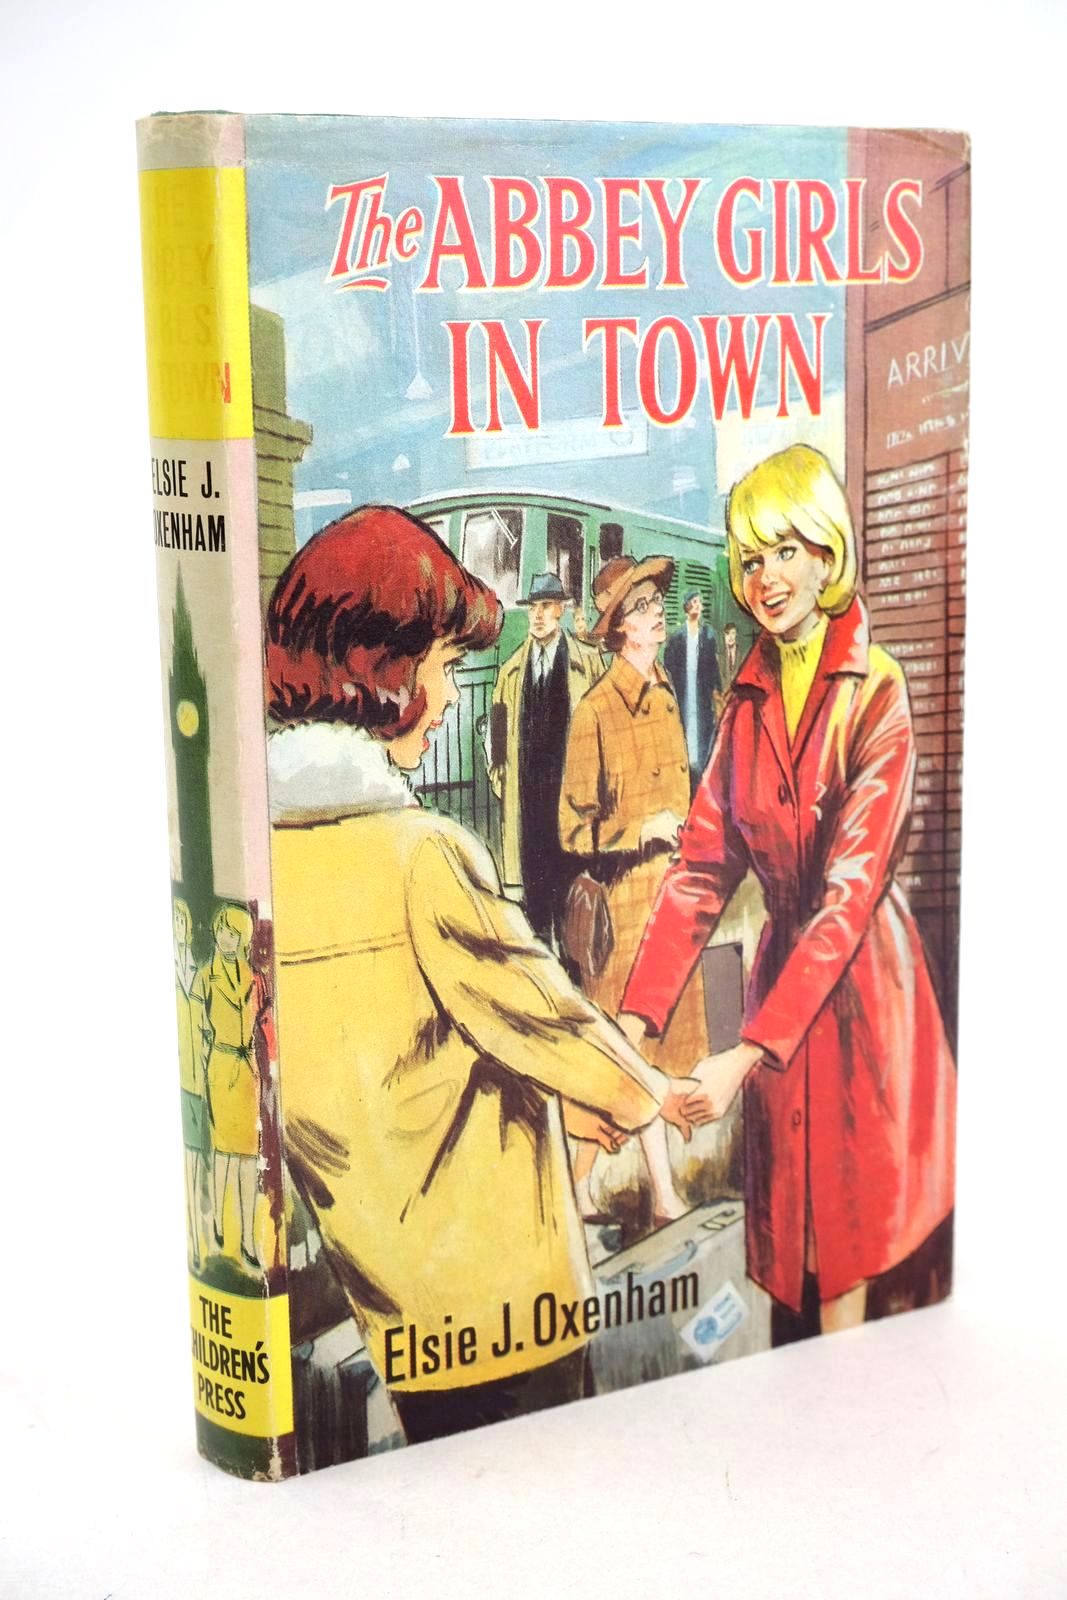 Photo of THE ABBEY GIRLS IN TOWN written by Oxenham, Elsie J. published by The Children's Press (STOCK CODE: 1327249)  for sale by Stella & Rose's Books